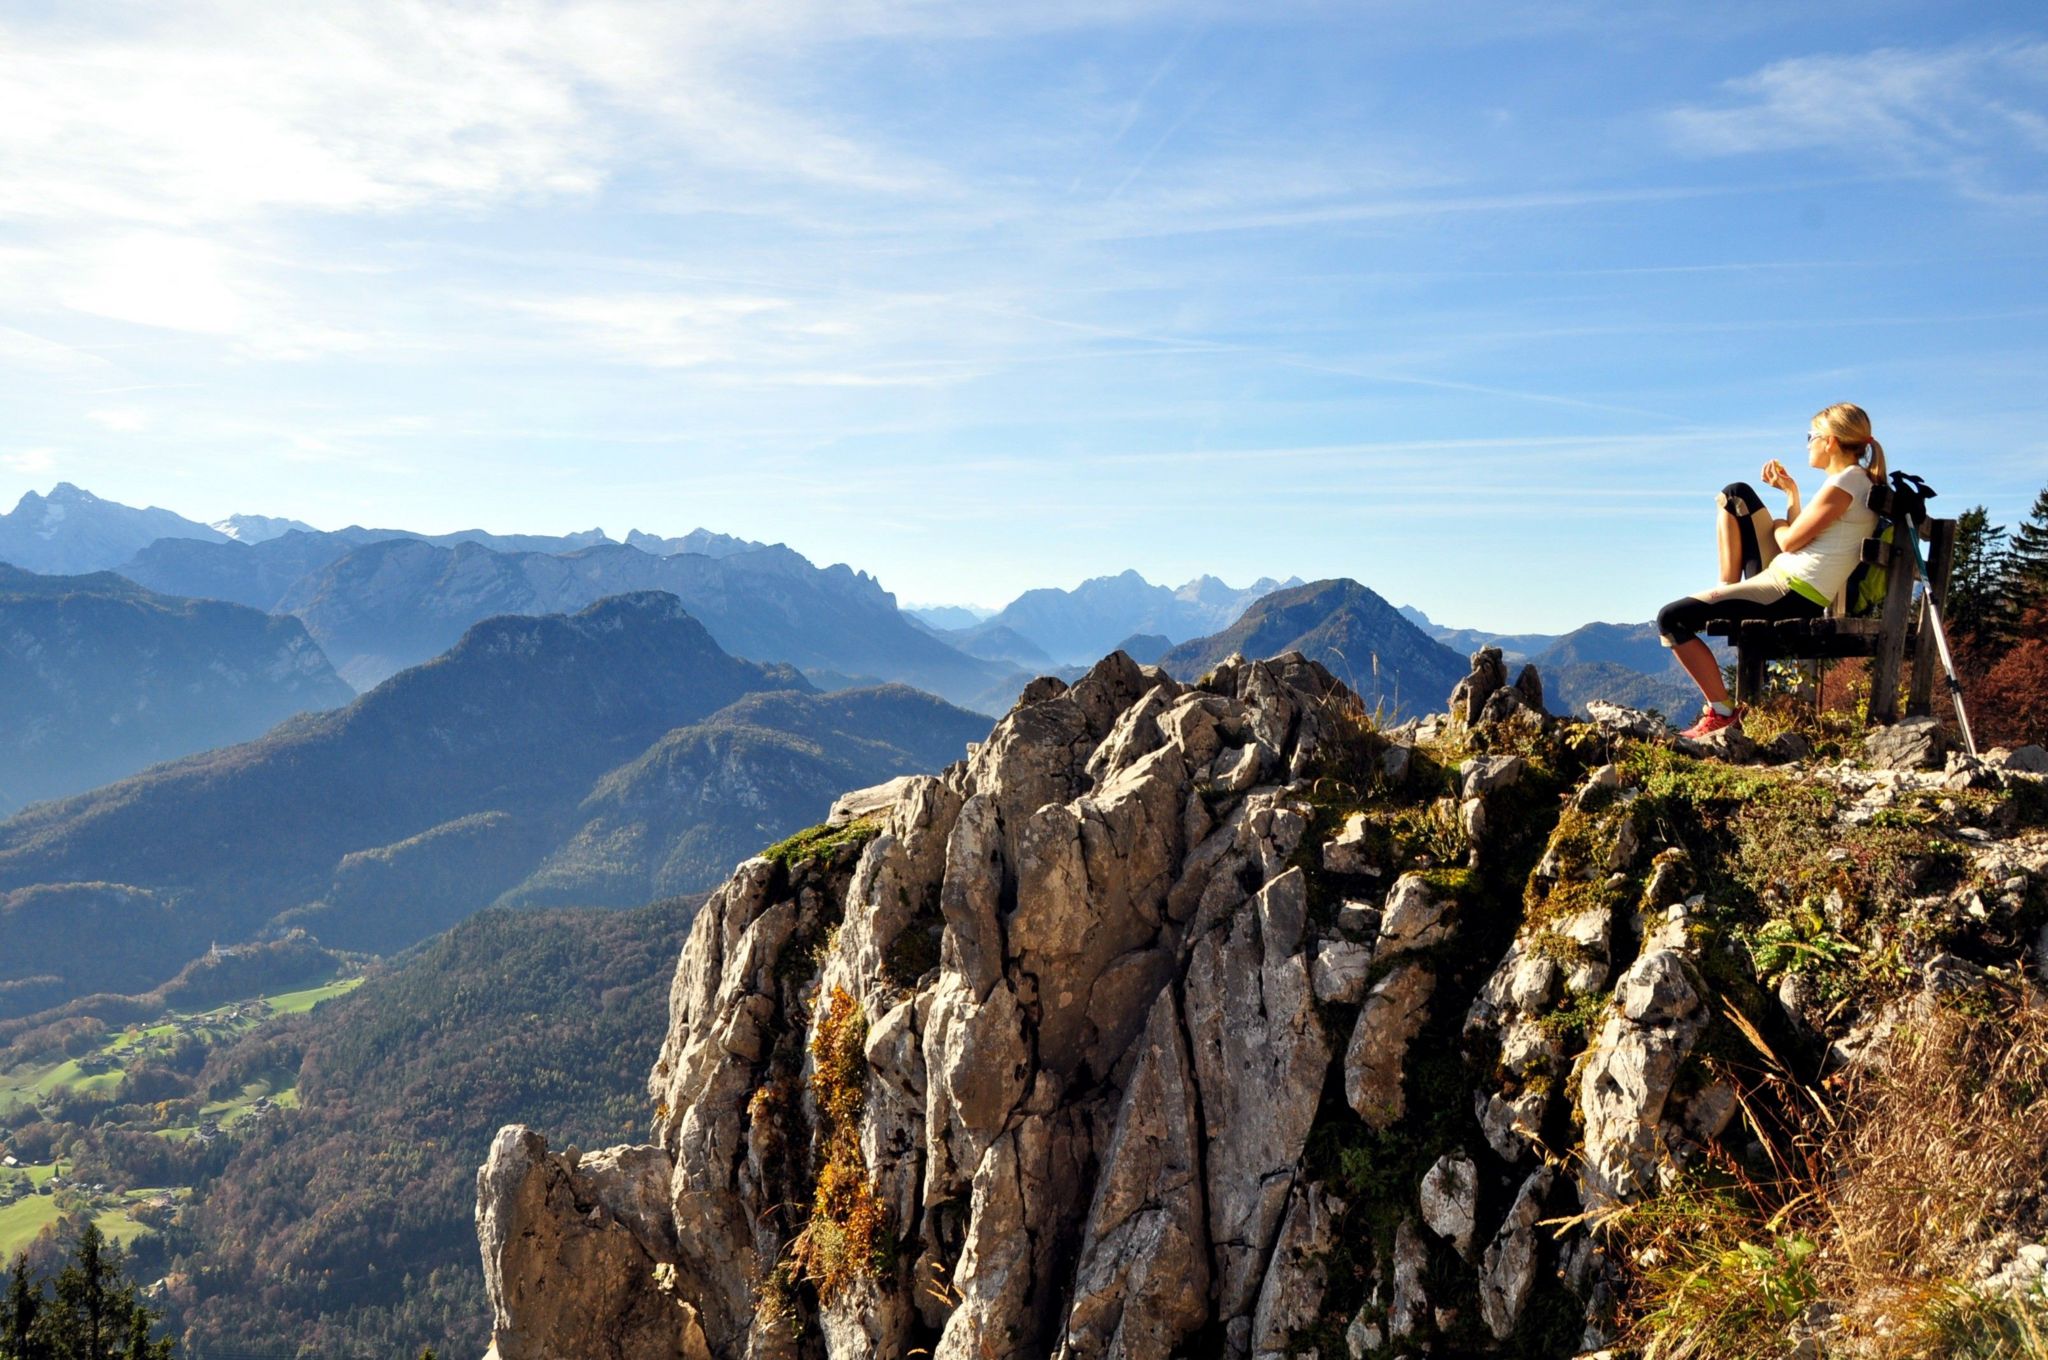 A woman relaxes and enjoys the view on top of a mountain